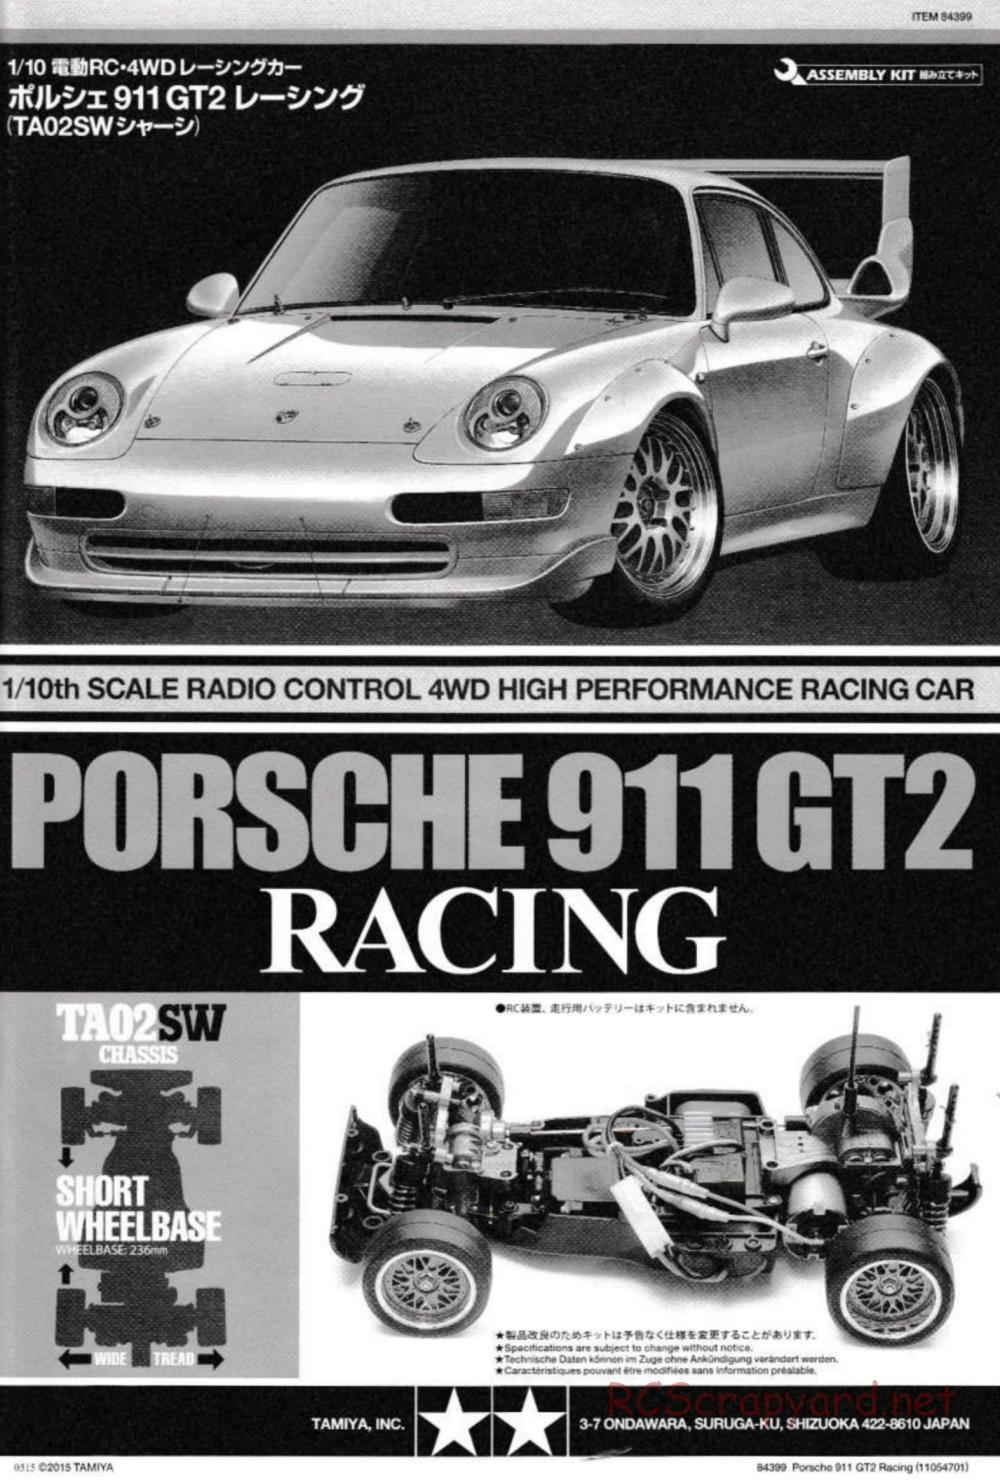 Tamiya - Porsche 911 GT2 Racing - TA-02SW Chassis - Manual - Page 1